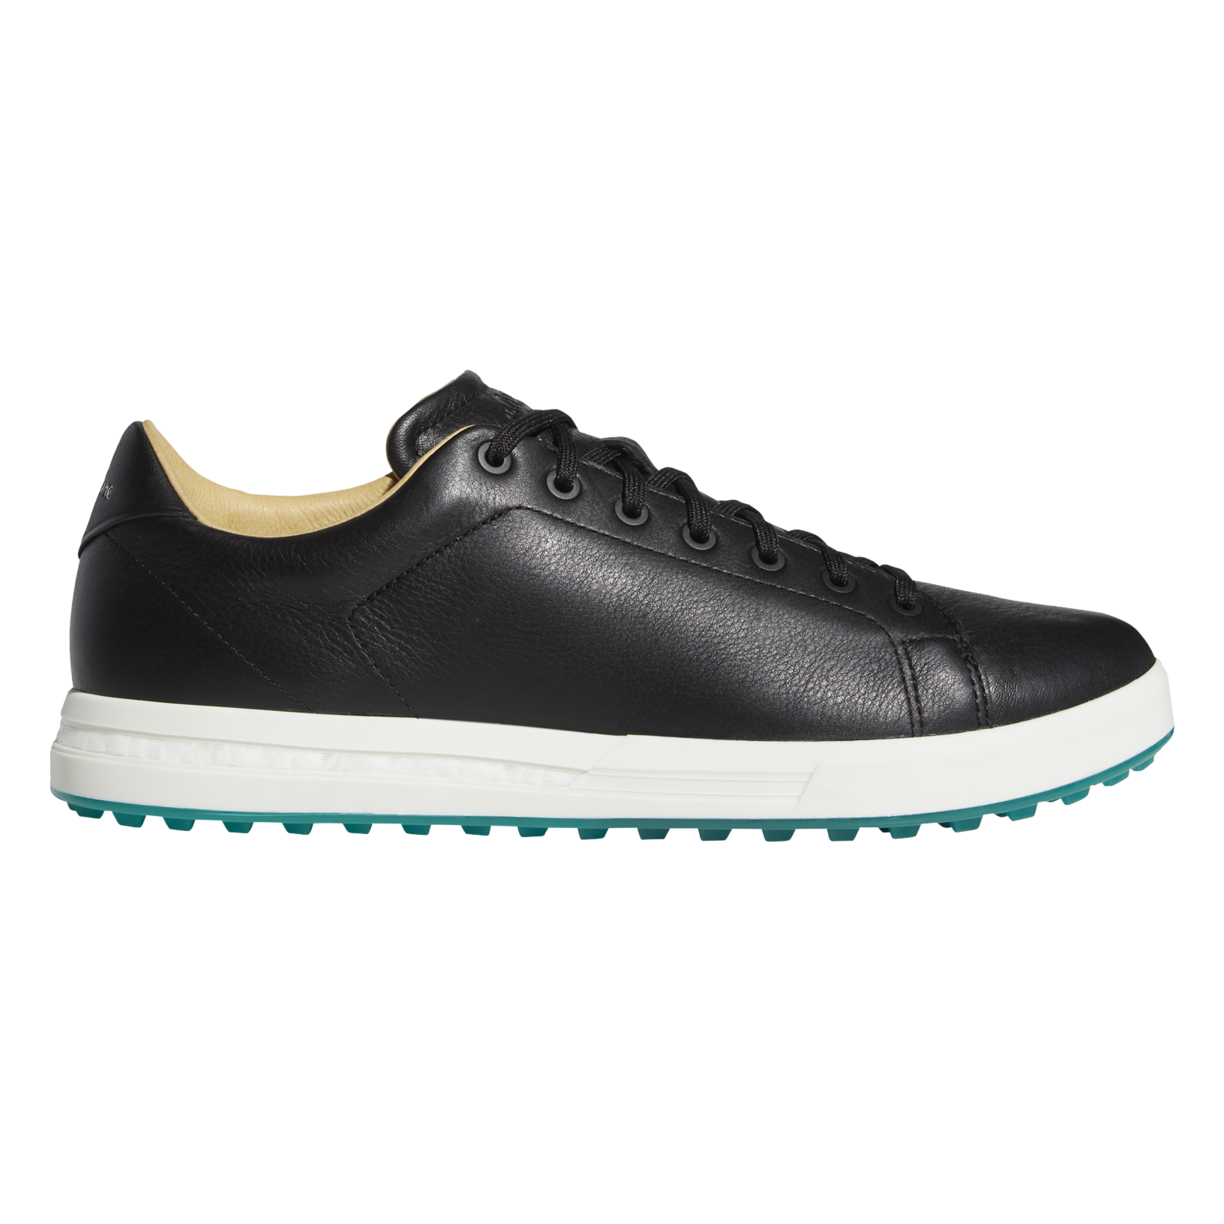 adipure sp 2.0 golf shoes